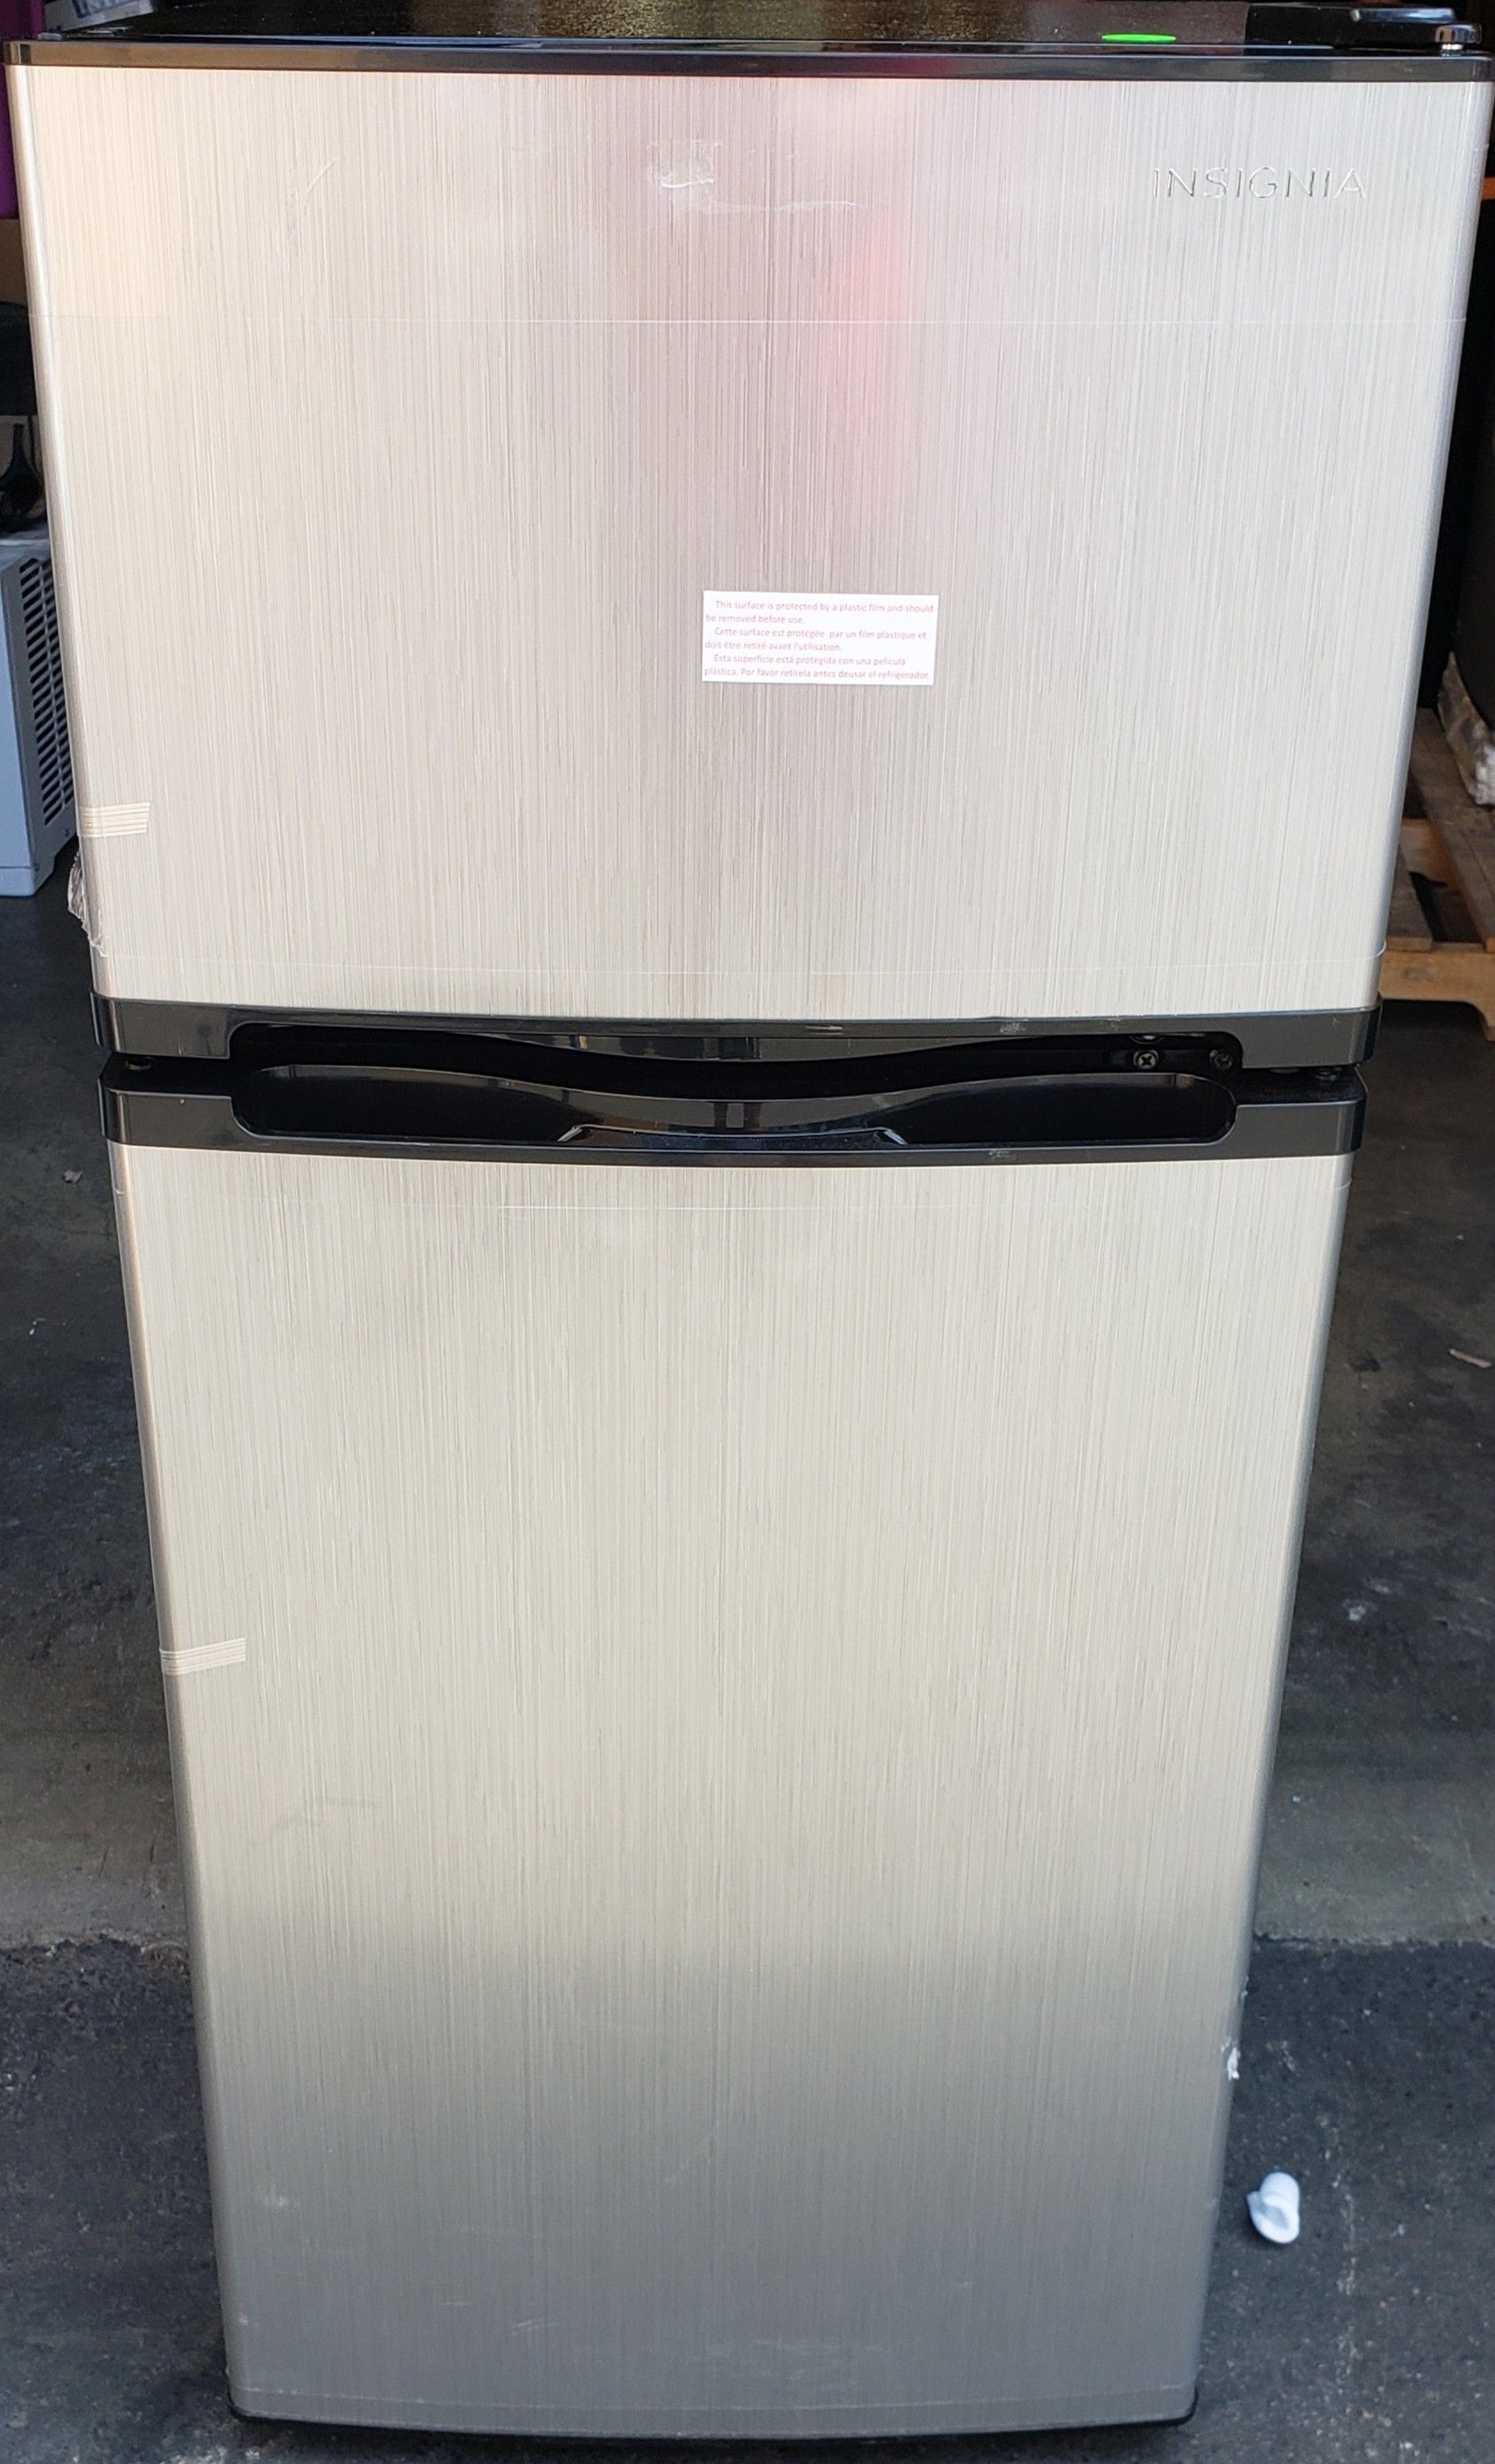 New Insignia™ - 4.3 Cu. Ft. Top-Freezer Refrigerator - Stainless steel Model: NS-CF43SS9 Minor Cosmetic Scratches